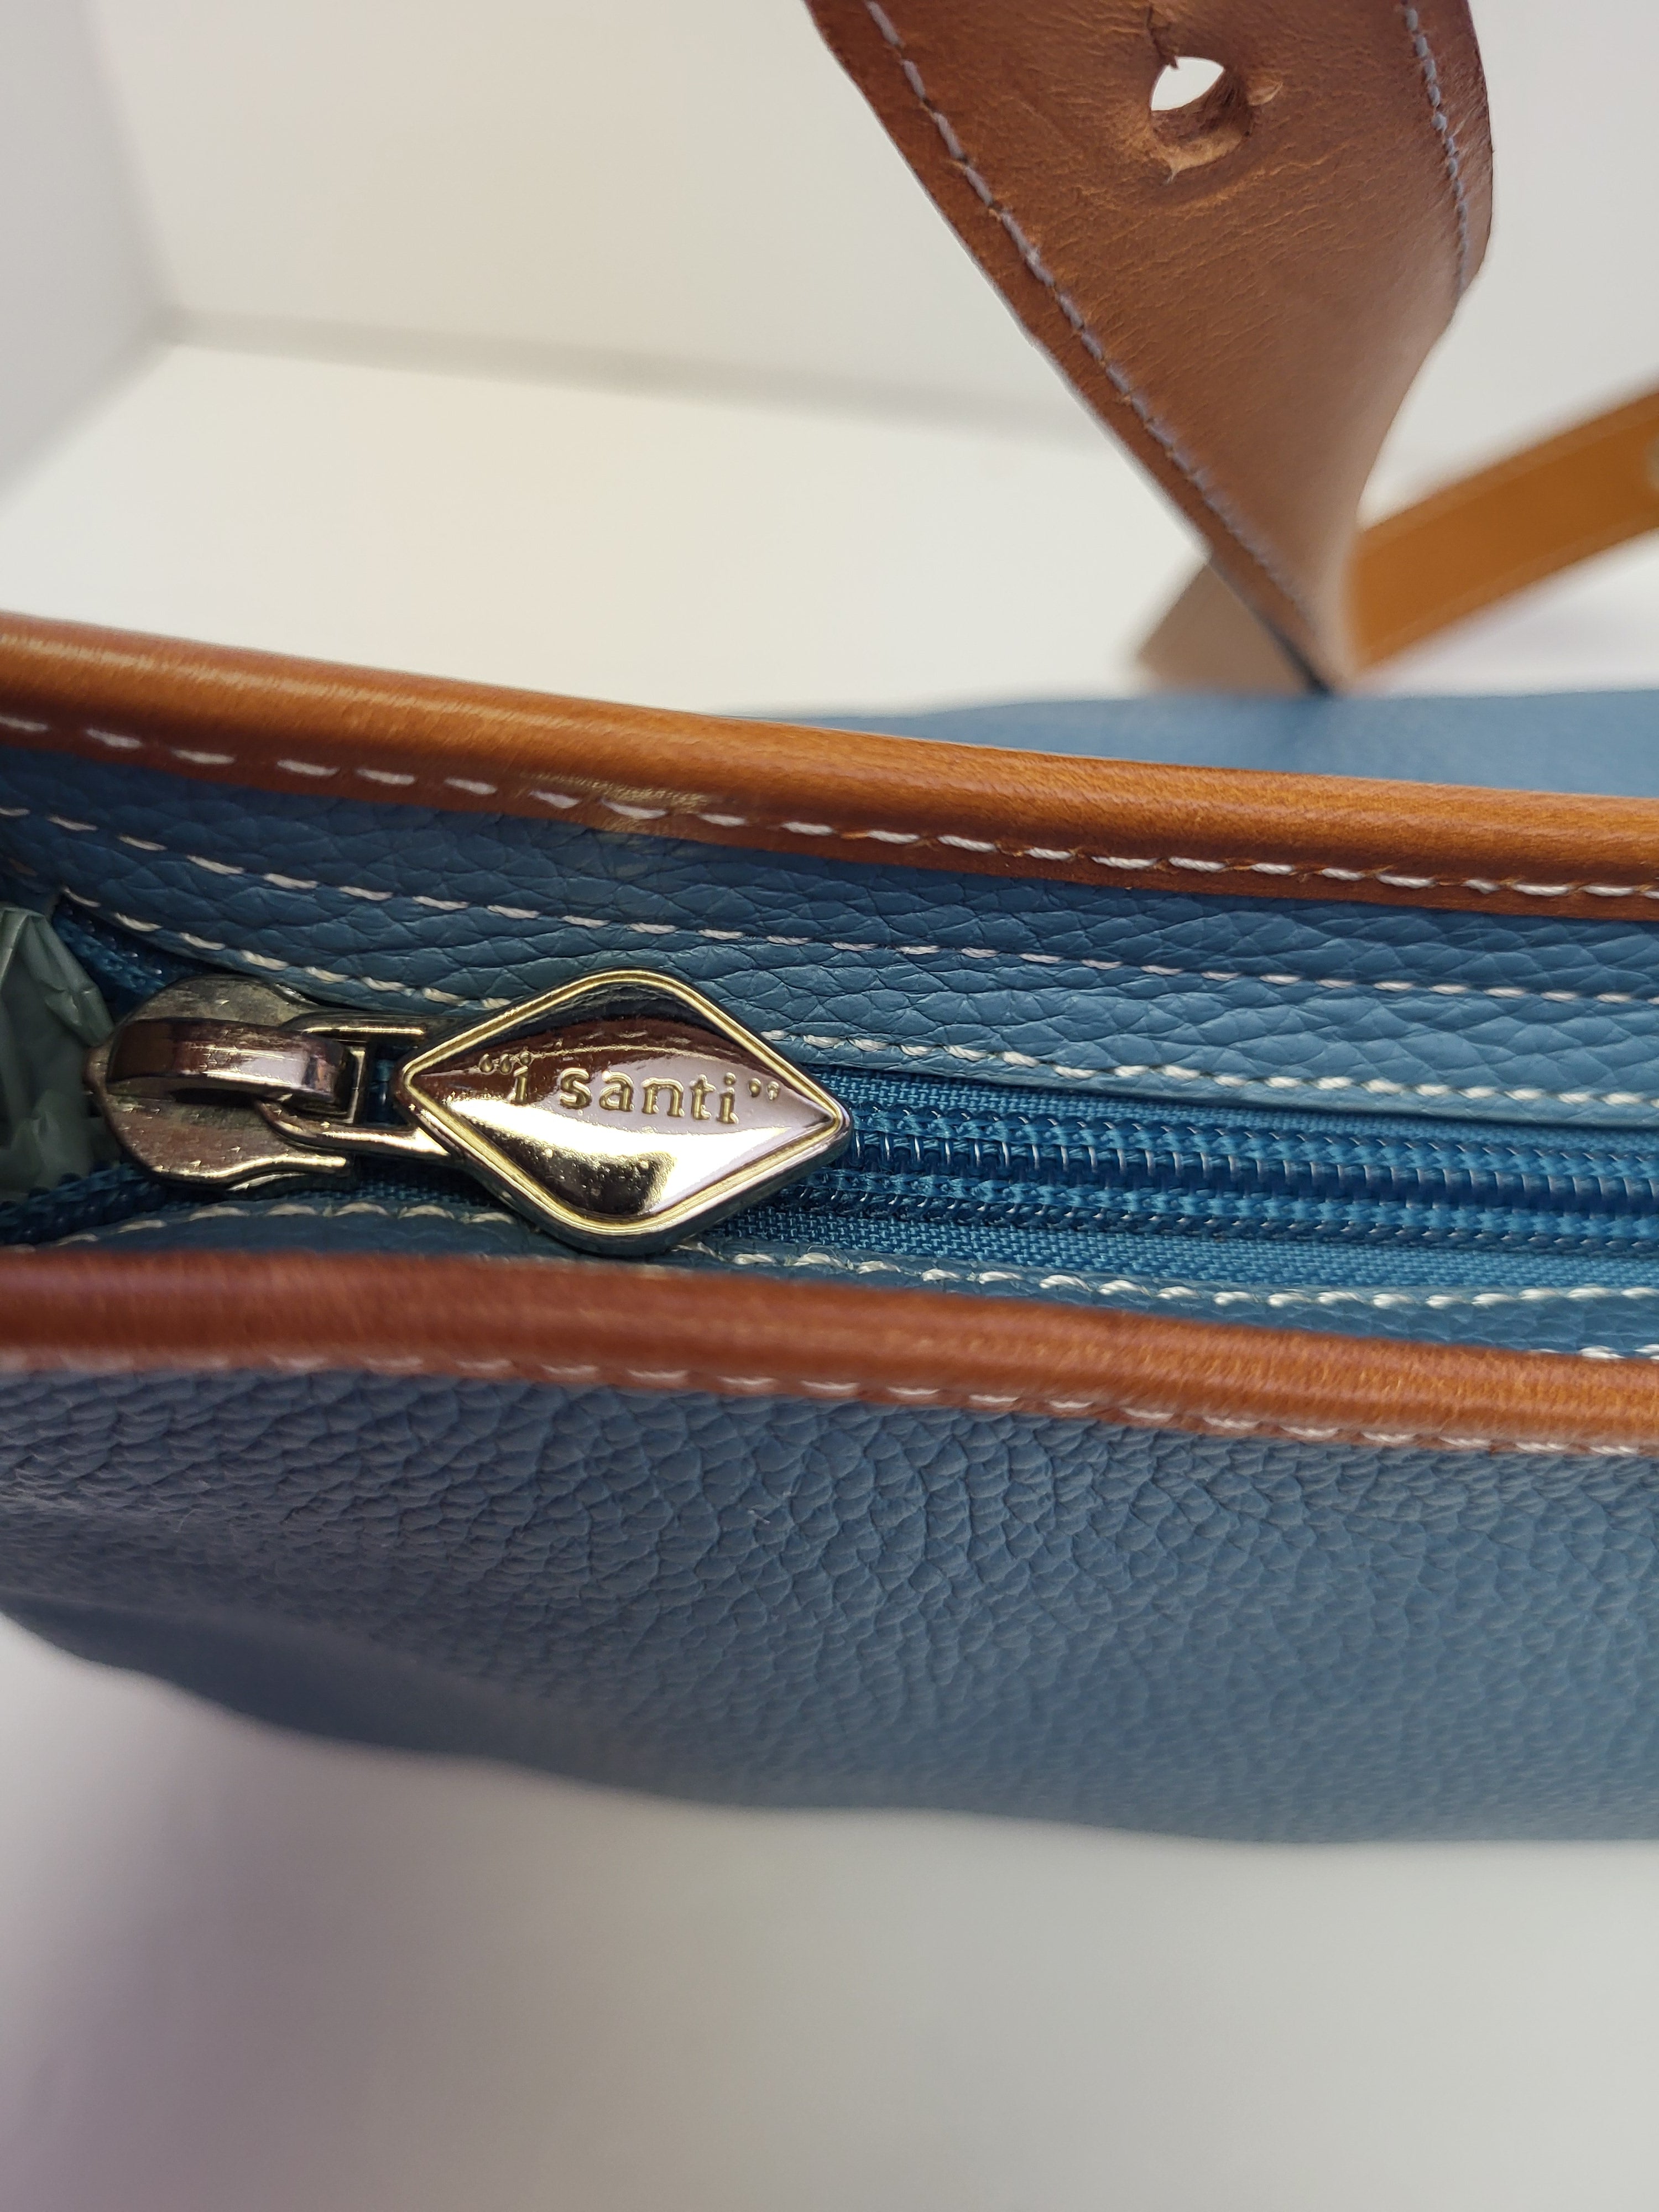 ISanti Blue Leather Shoulder Bag With Vachetta Leather Details